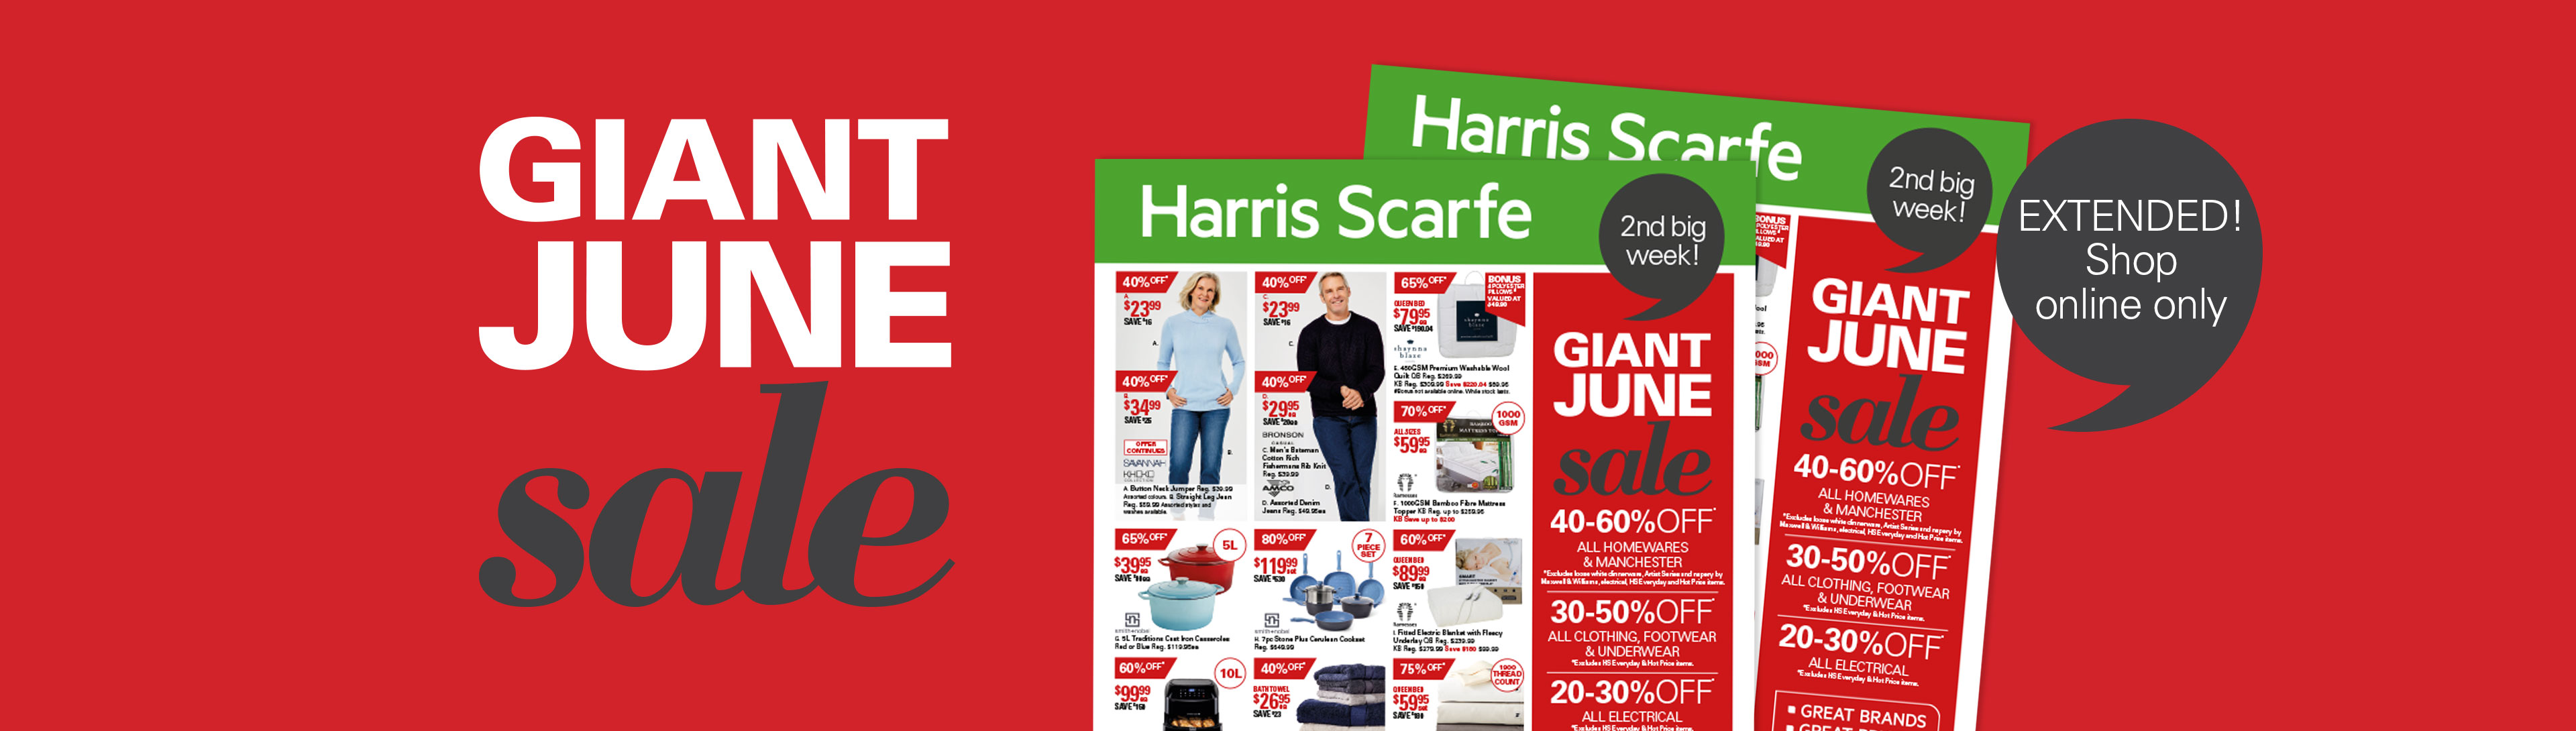 Giant June sale catalogue - Up to 60% OFF on clothing, kitchenware & electricals